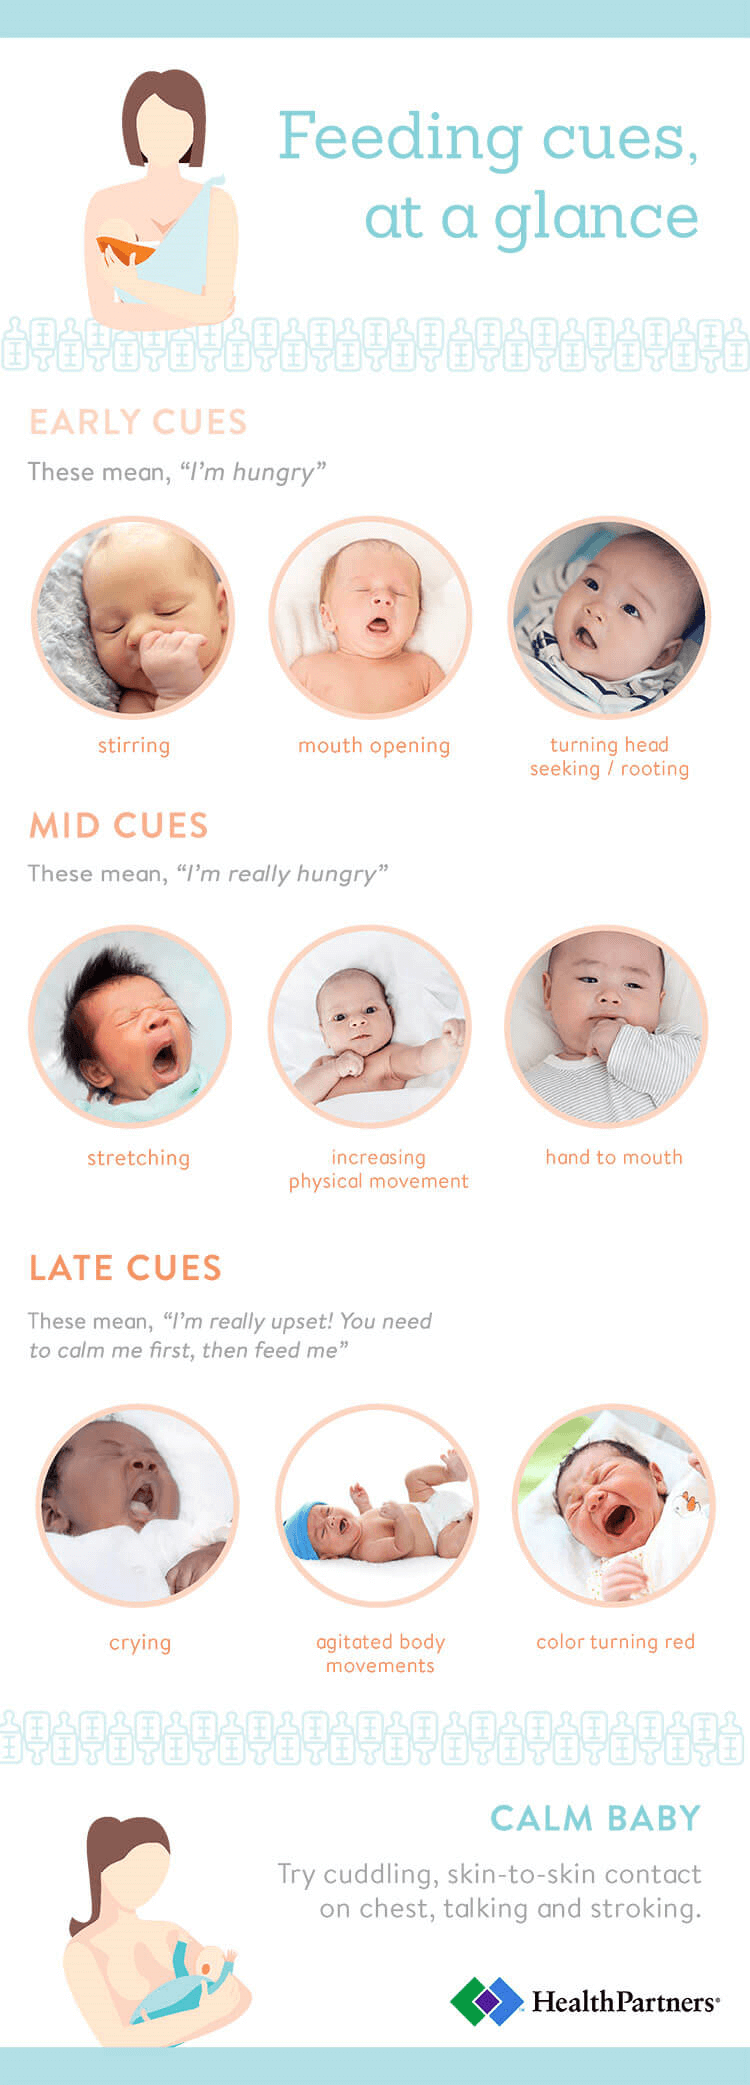 Feeding cues, at a glance Early cues from your baby These mean, “I’m hungry” When your baby is: • Stirring • Opening their mouth • Turning their head, seeking, rooting Mid cues from your baby These mean, “I’m really hungry” When your baby is: • Stretching • Increasing their physical movement • Putting their hand to their mouth Late cues from your baby These mean, “I’m really upset! You need to calm me first, then feed me” When your baby is: • Crying • Making agitated body movements • Having their skin color turn red To calm your baby: Try cuddling, skin-to-skin contact on your chest, talking and stroking. 